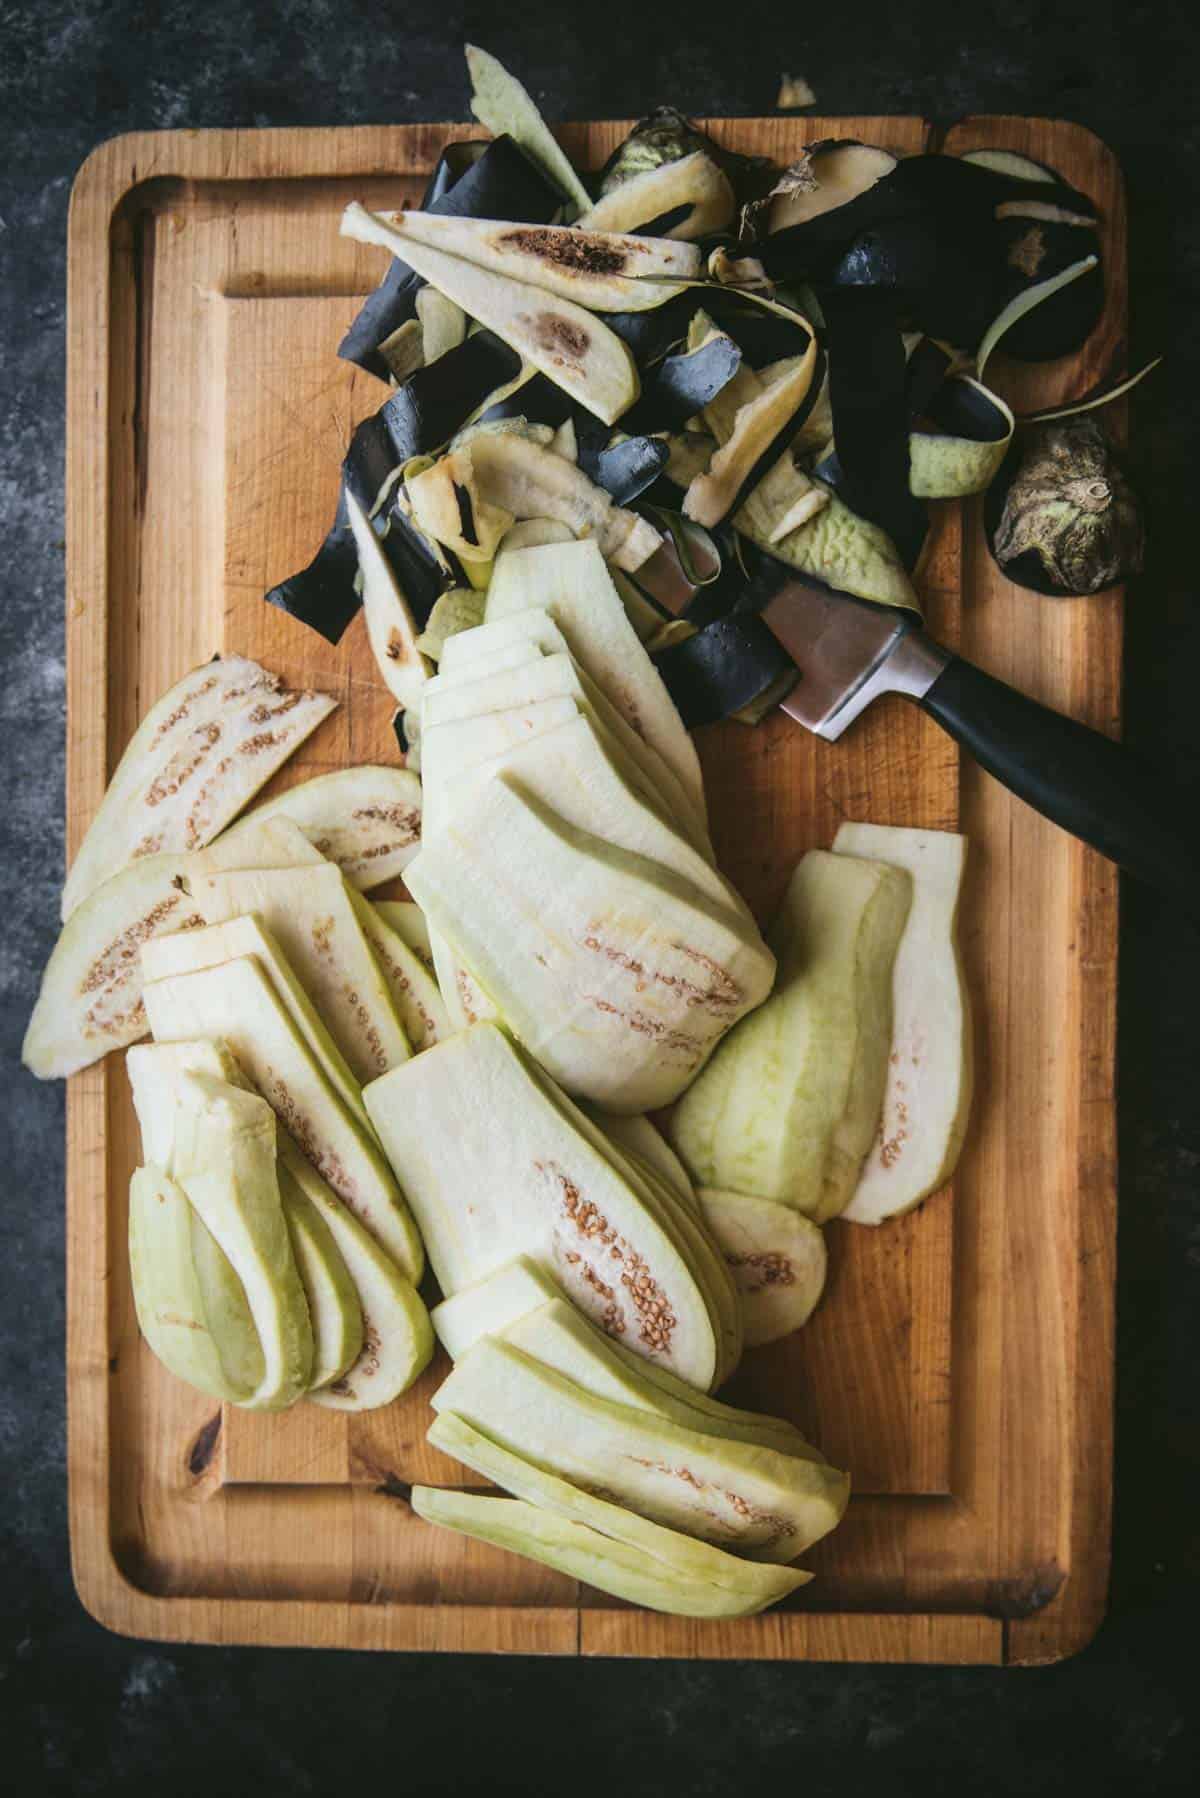 Eggplant is now peeled and sliced into planks atop the wooden chopping board. There is a knife underneath a large pile of eggplant skin waiting to be discarded.